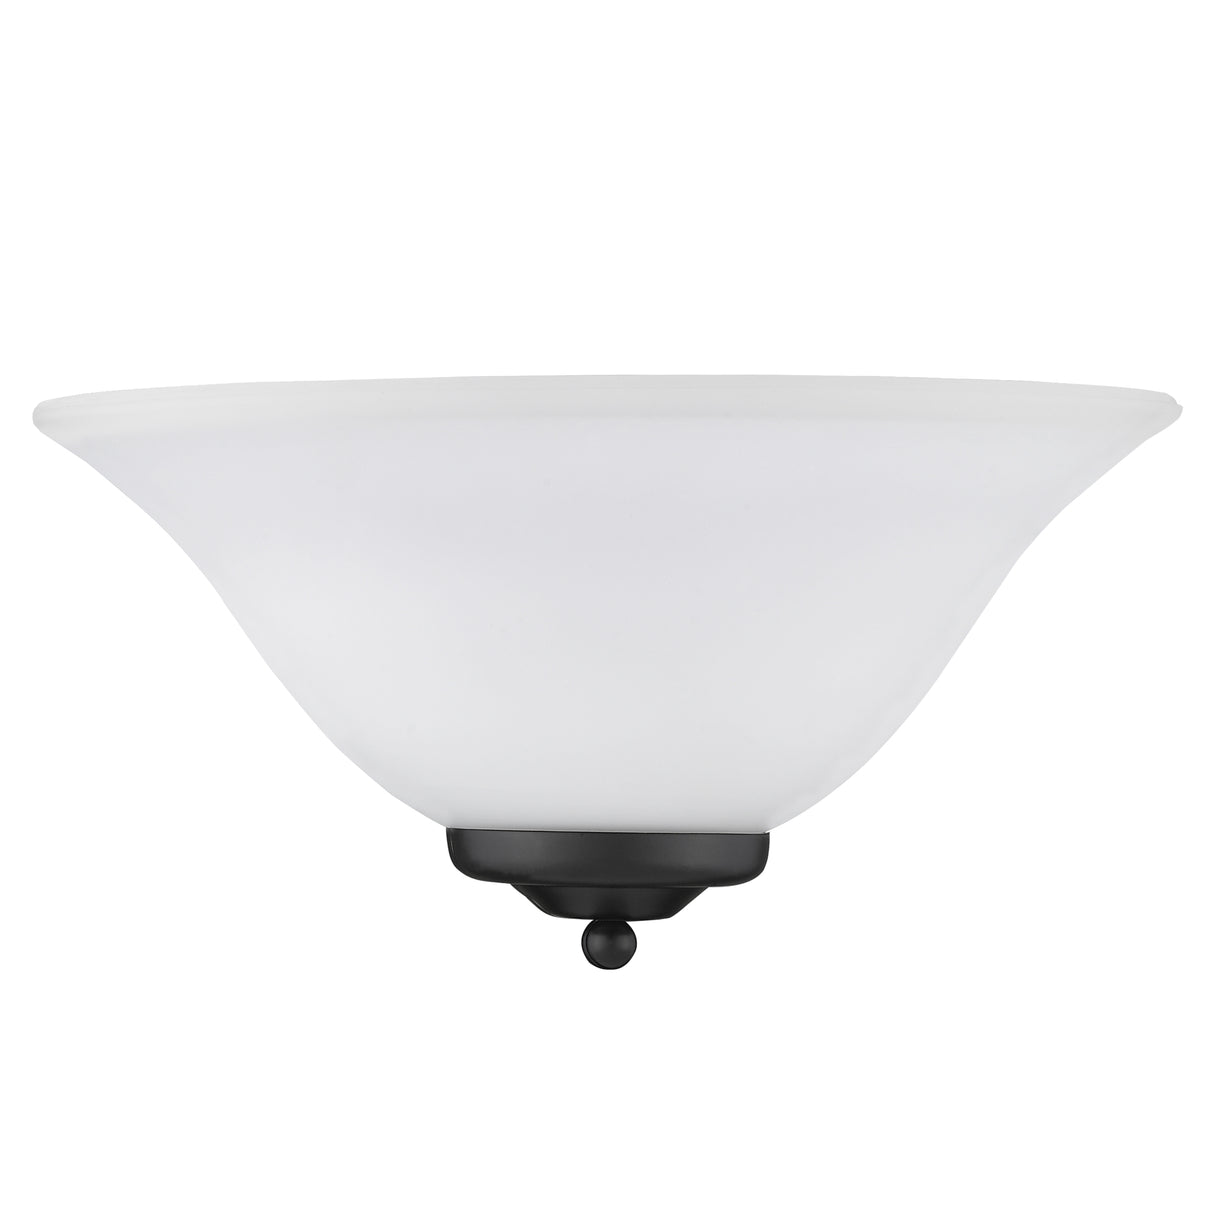 Multi-Family 1 Light Wall Sconce in Matte Black with Opal Glass